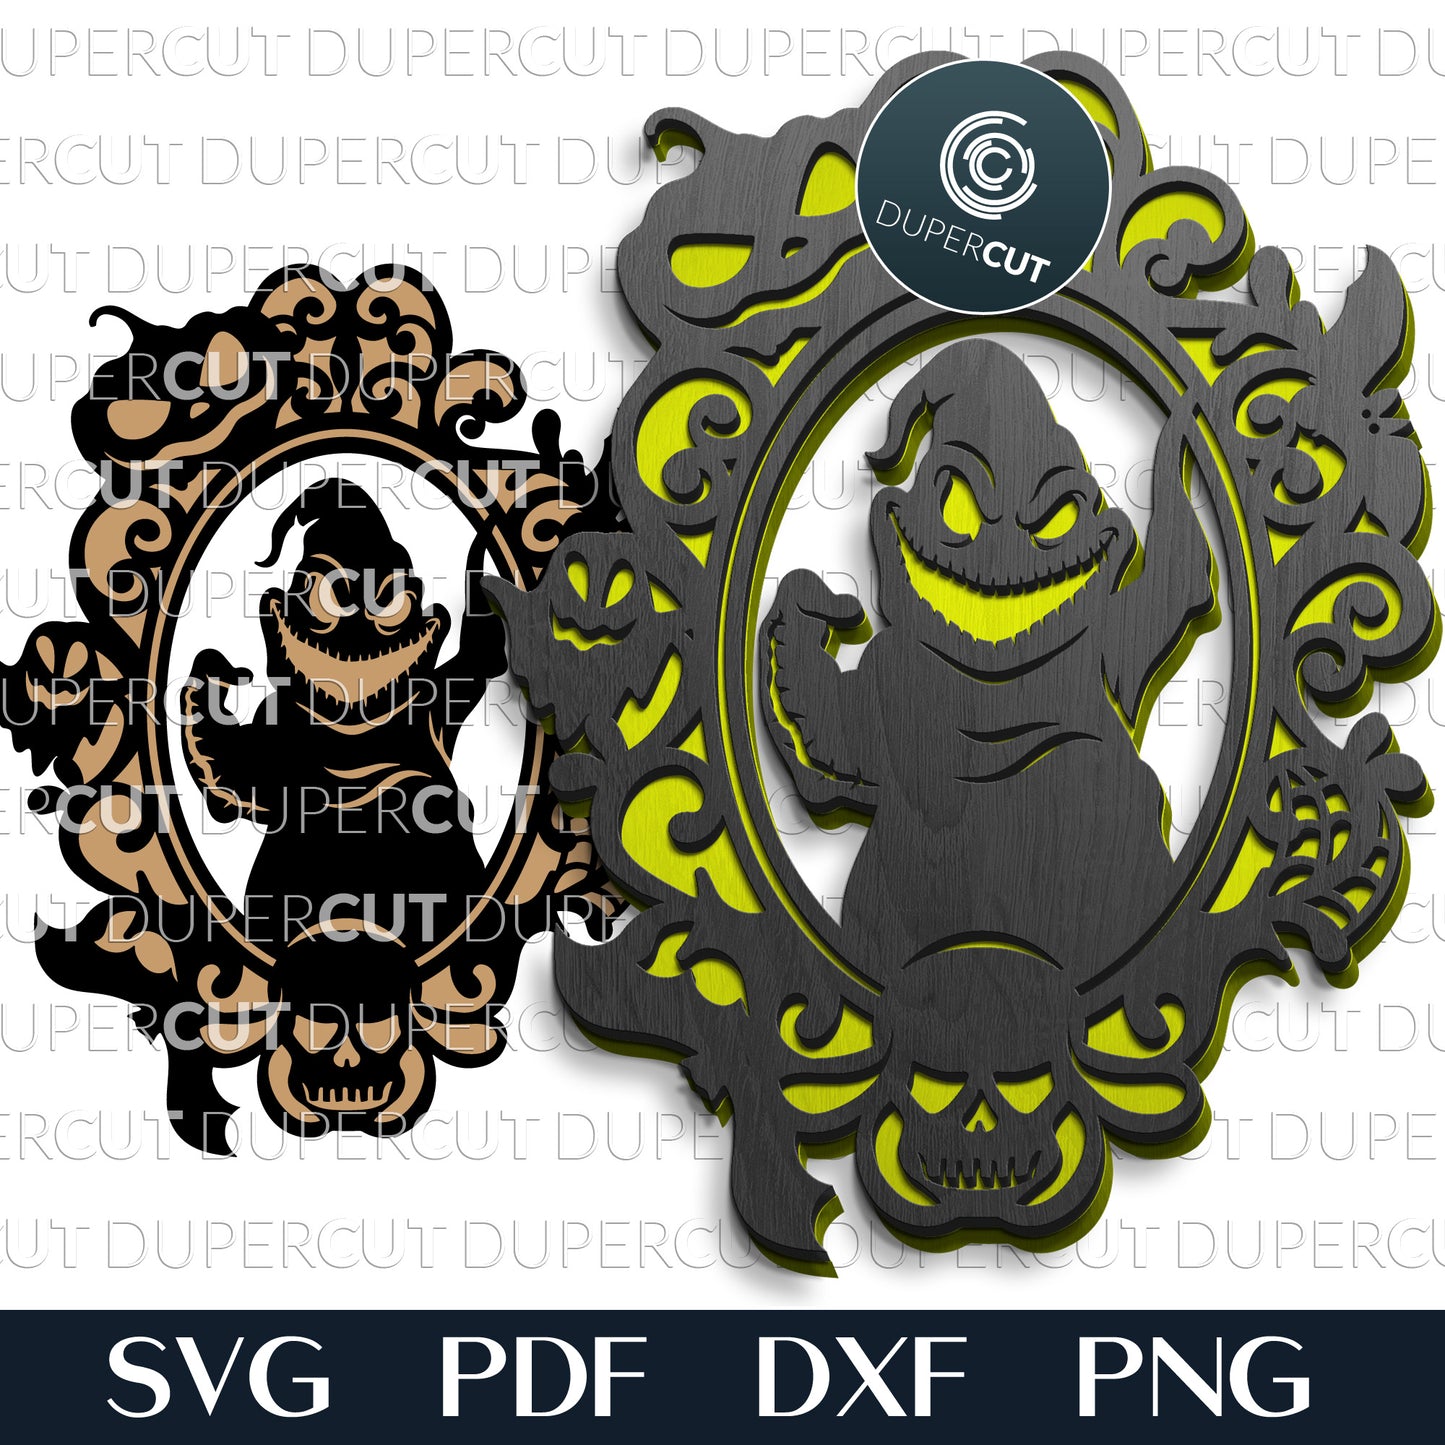 Halloween door hanger layered designs for laser cutting machines. SVG PDF DXF vector files for Glowforge, Cricut, Silhouette, CNC plasma machines